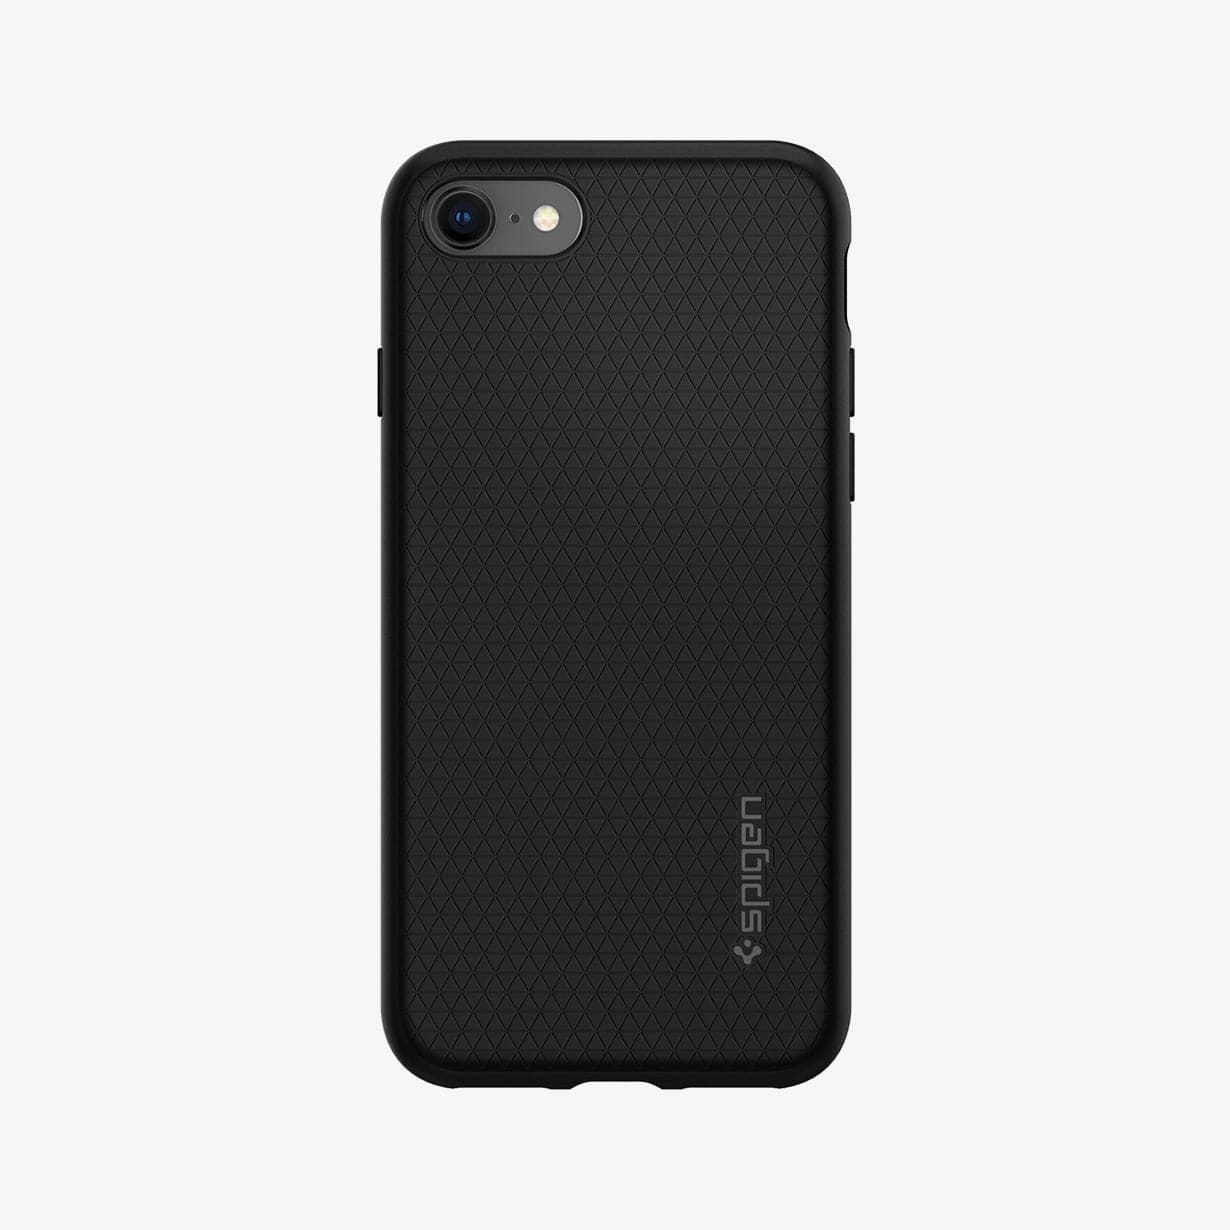 042CS20511 - iPhone 8 Series Liquid Air Case in Black showing the back